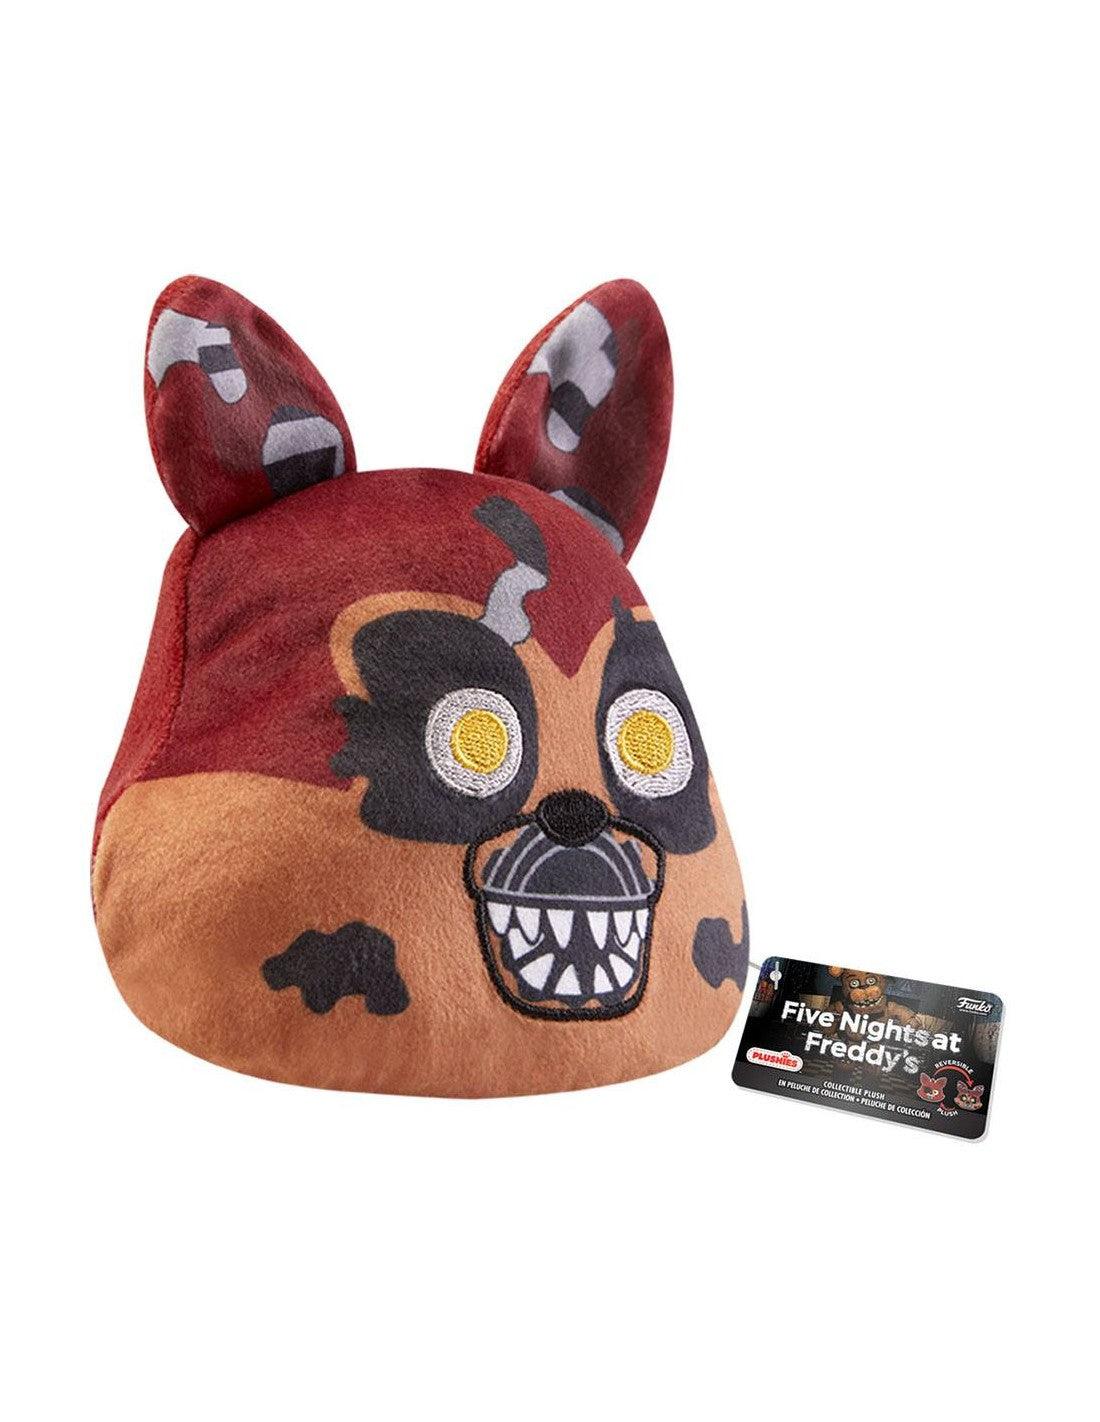  Funko Five Nights at Freddys Firework Freddy Collectible Plush  Figure Limited Edition Exclusive, 71336 : Toys & Games